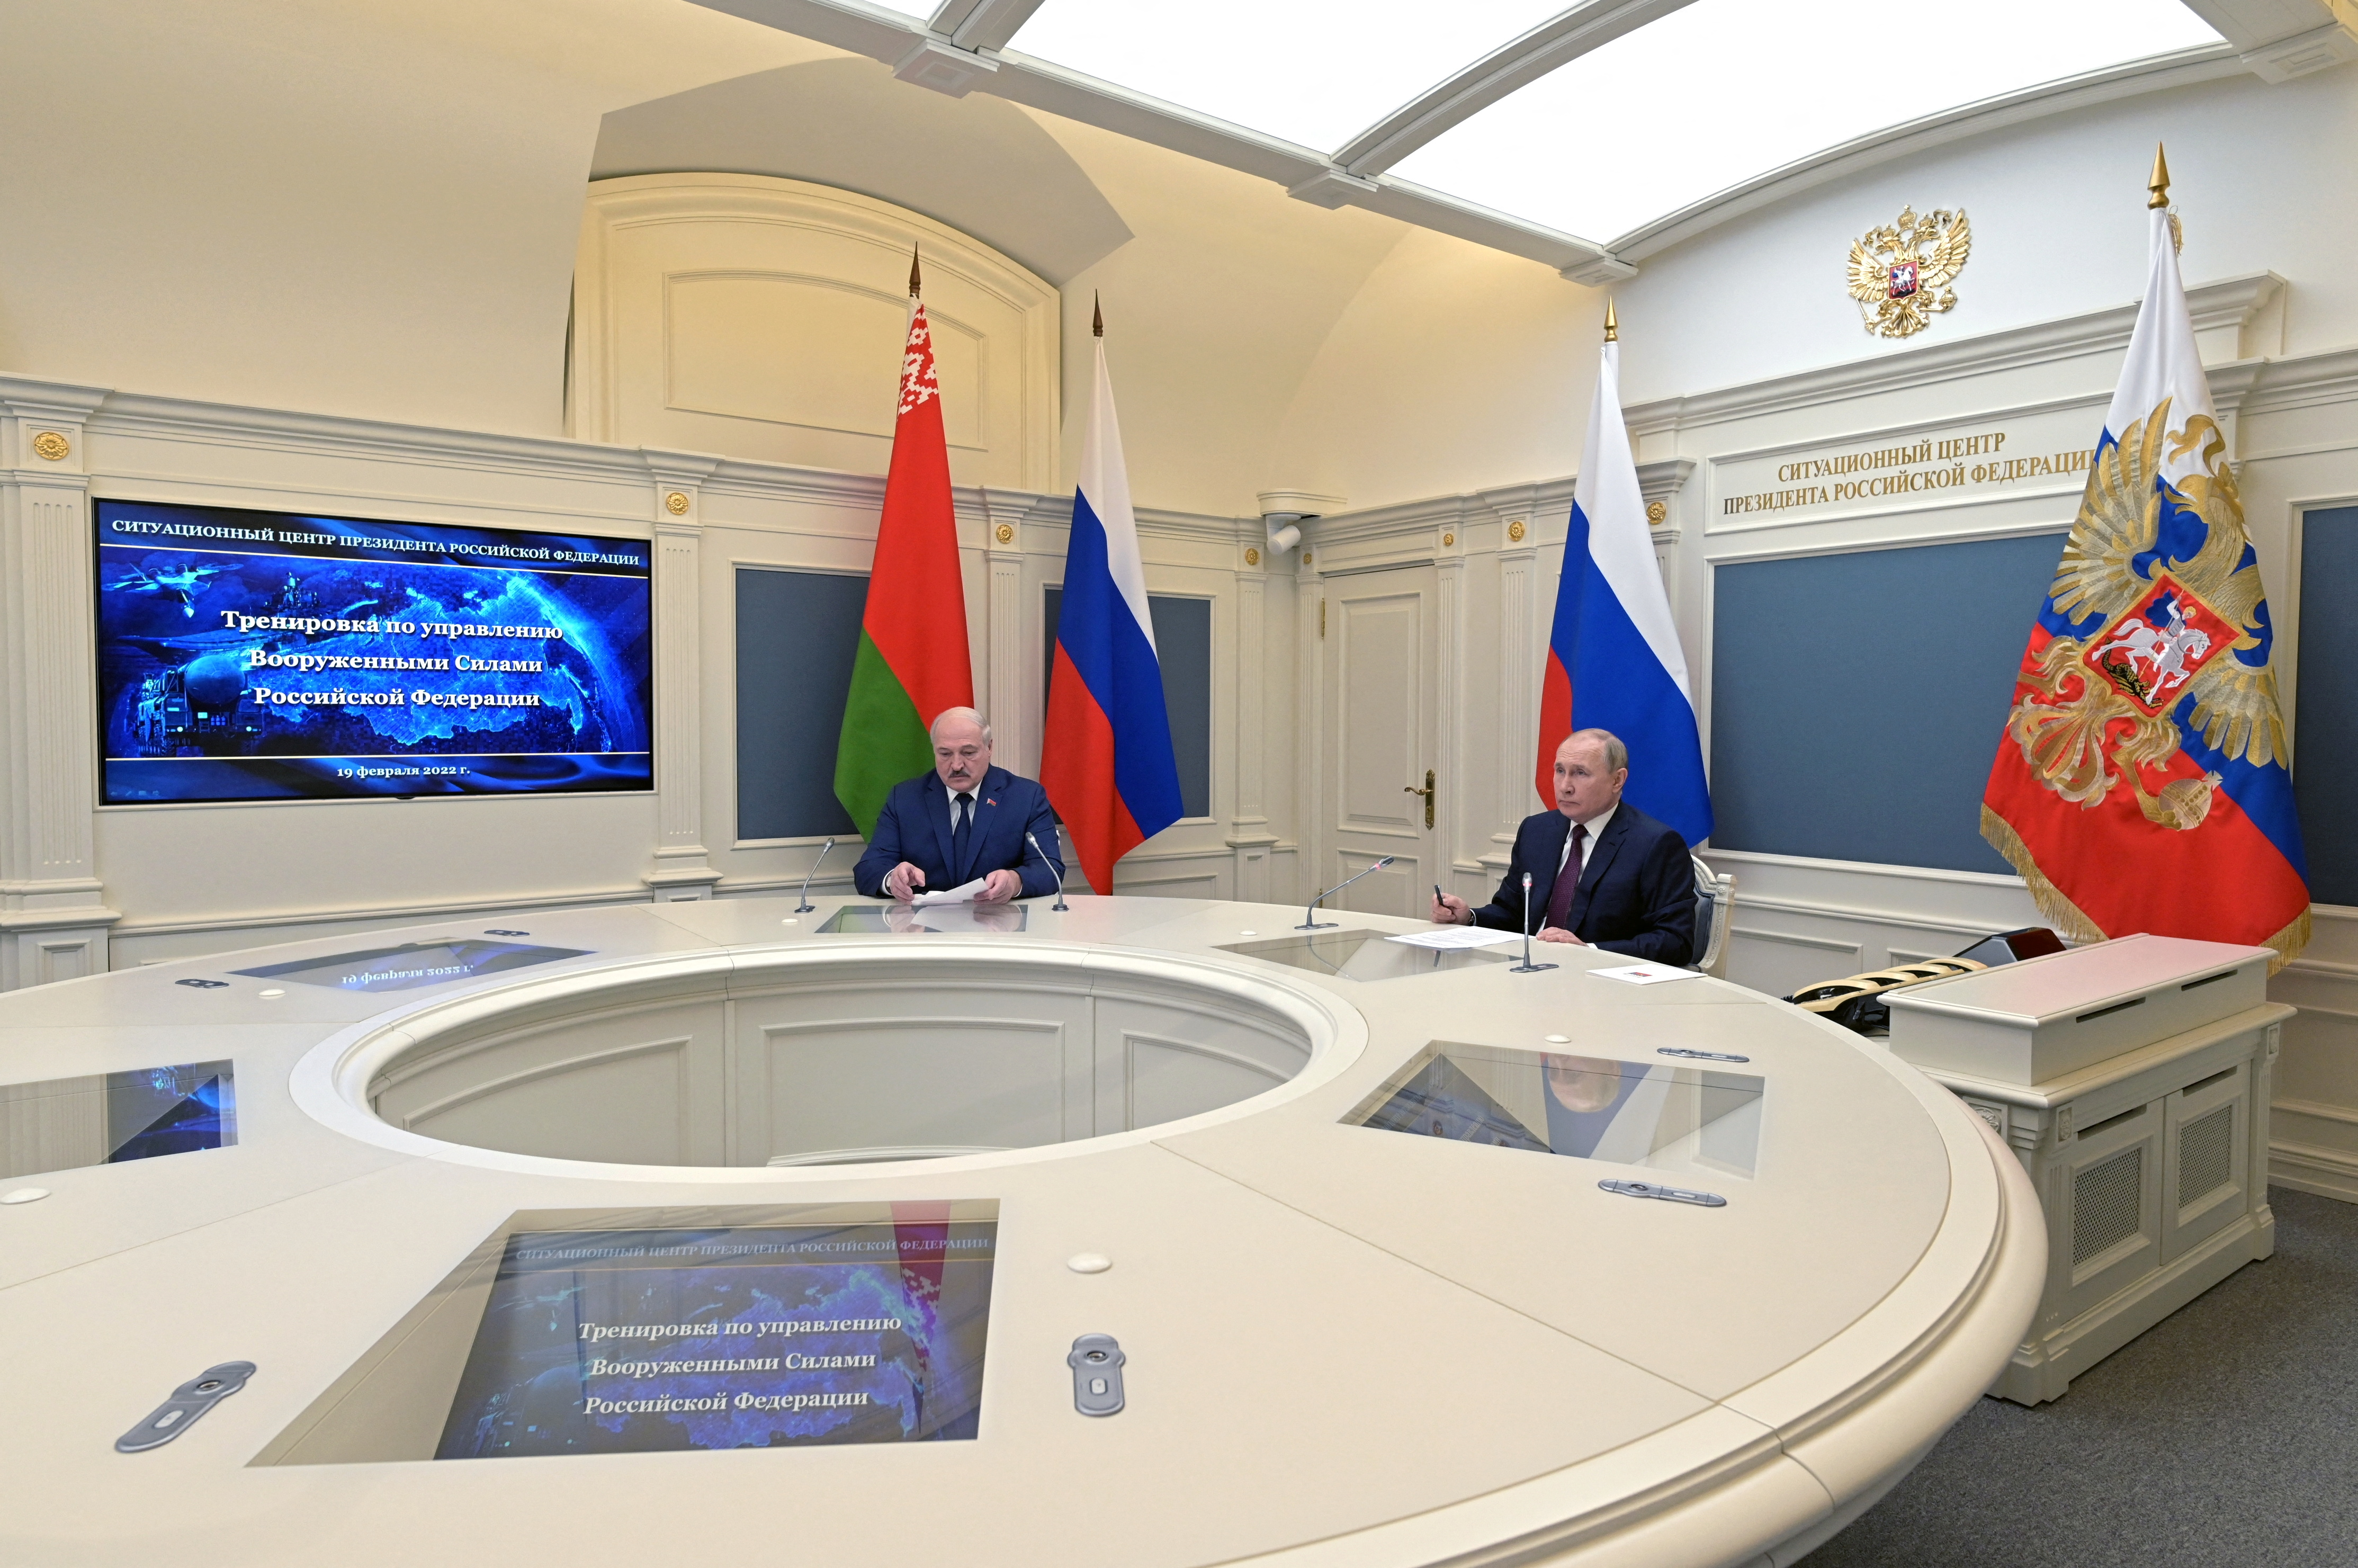 Russian President Vladimir Putin and Belarusian President Alexander Lukashenko observe the exercise of the strategic deterrence force, in Moscow